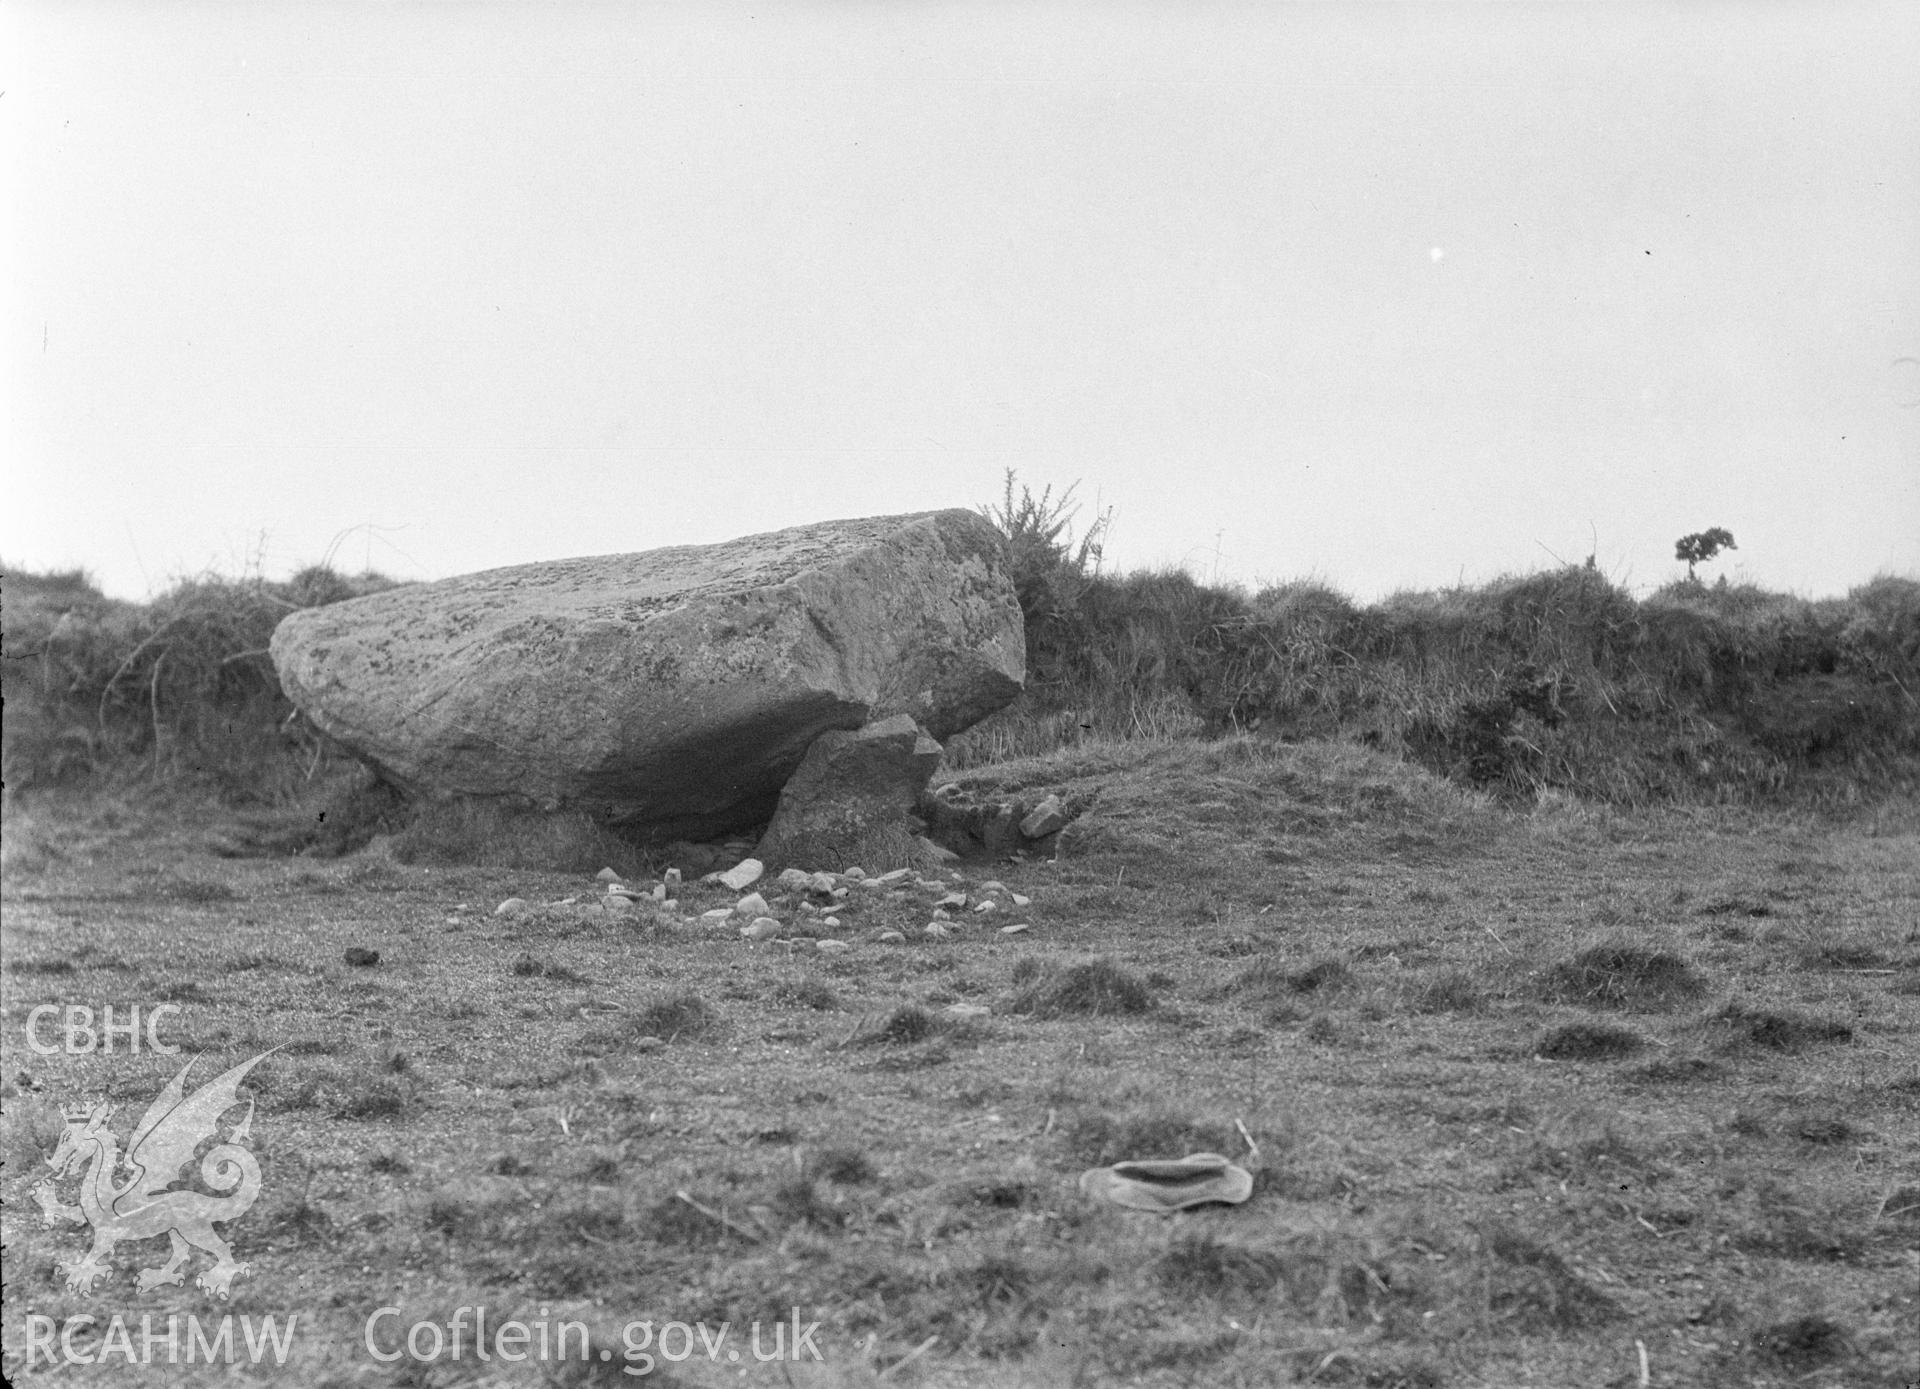 Digital copy of a nitrate negative showing Cilan Uchaf Burial Chamber.